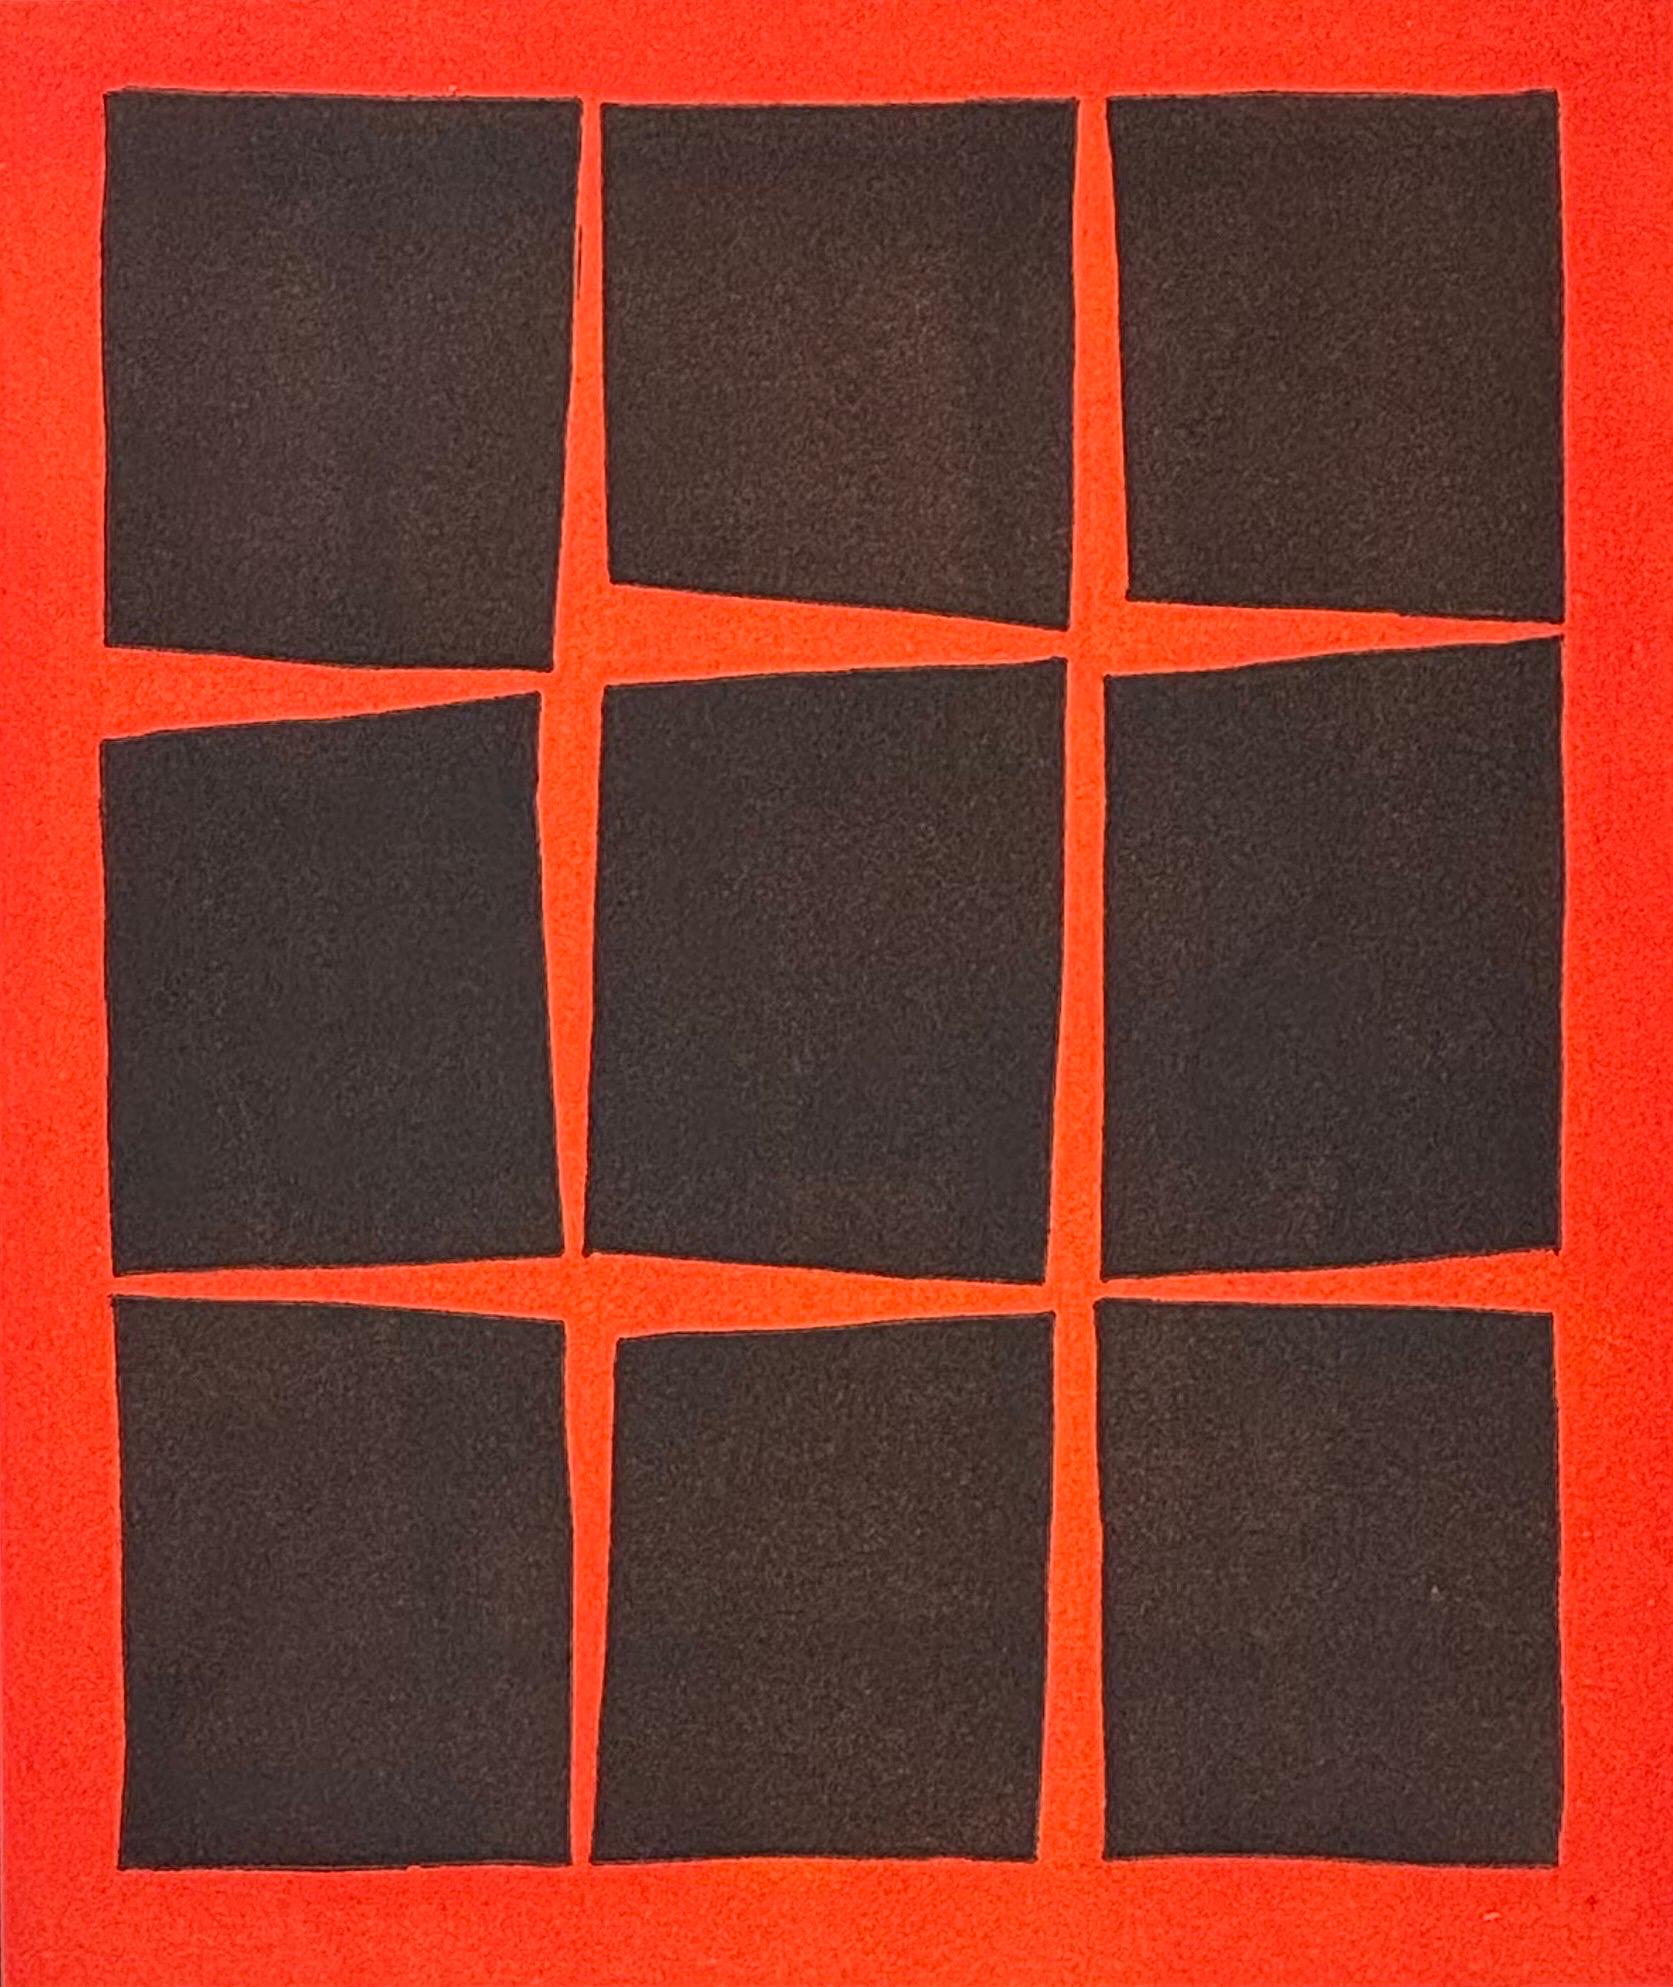 Linocut by Bay Area Joyce H Dean printmaker, we acquired a body of work by the artist, her career from this collection ranges from the 1970s to about the mid 1990s. This piece dates to 1976, two color print in black and red with the squares embossed